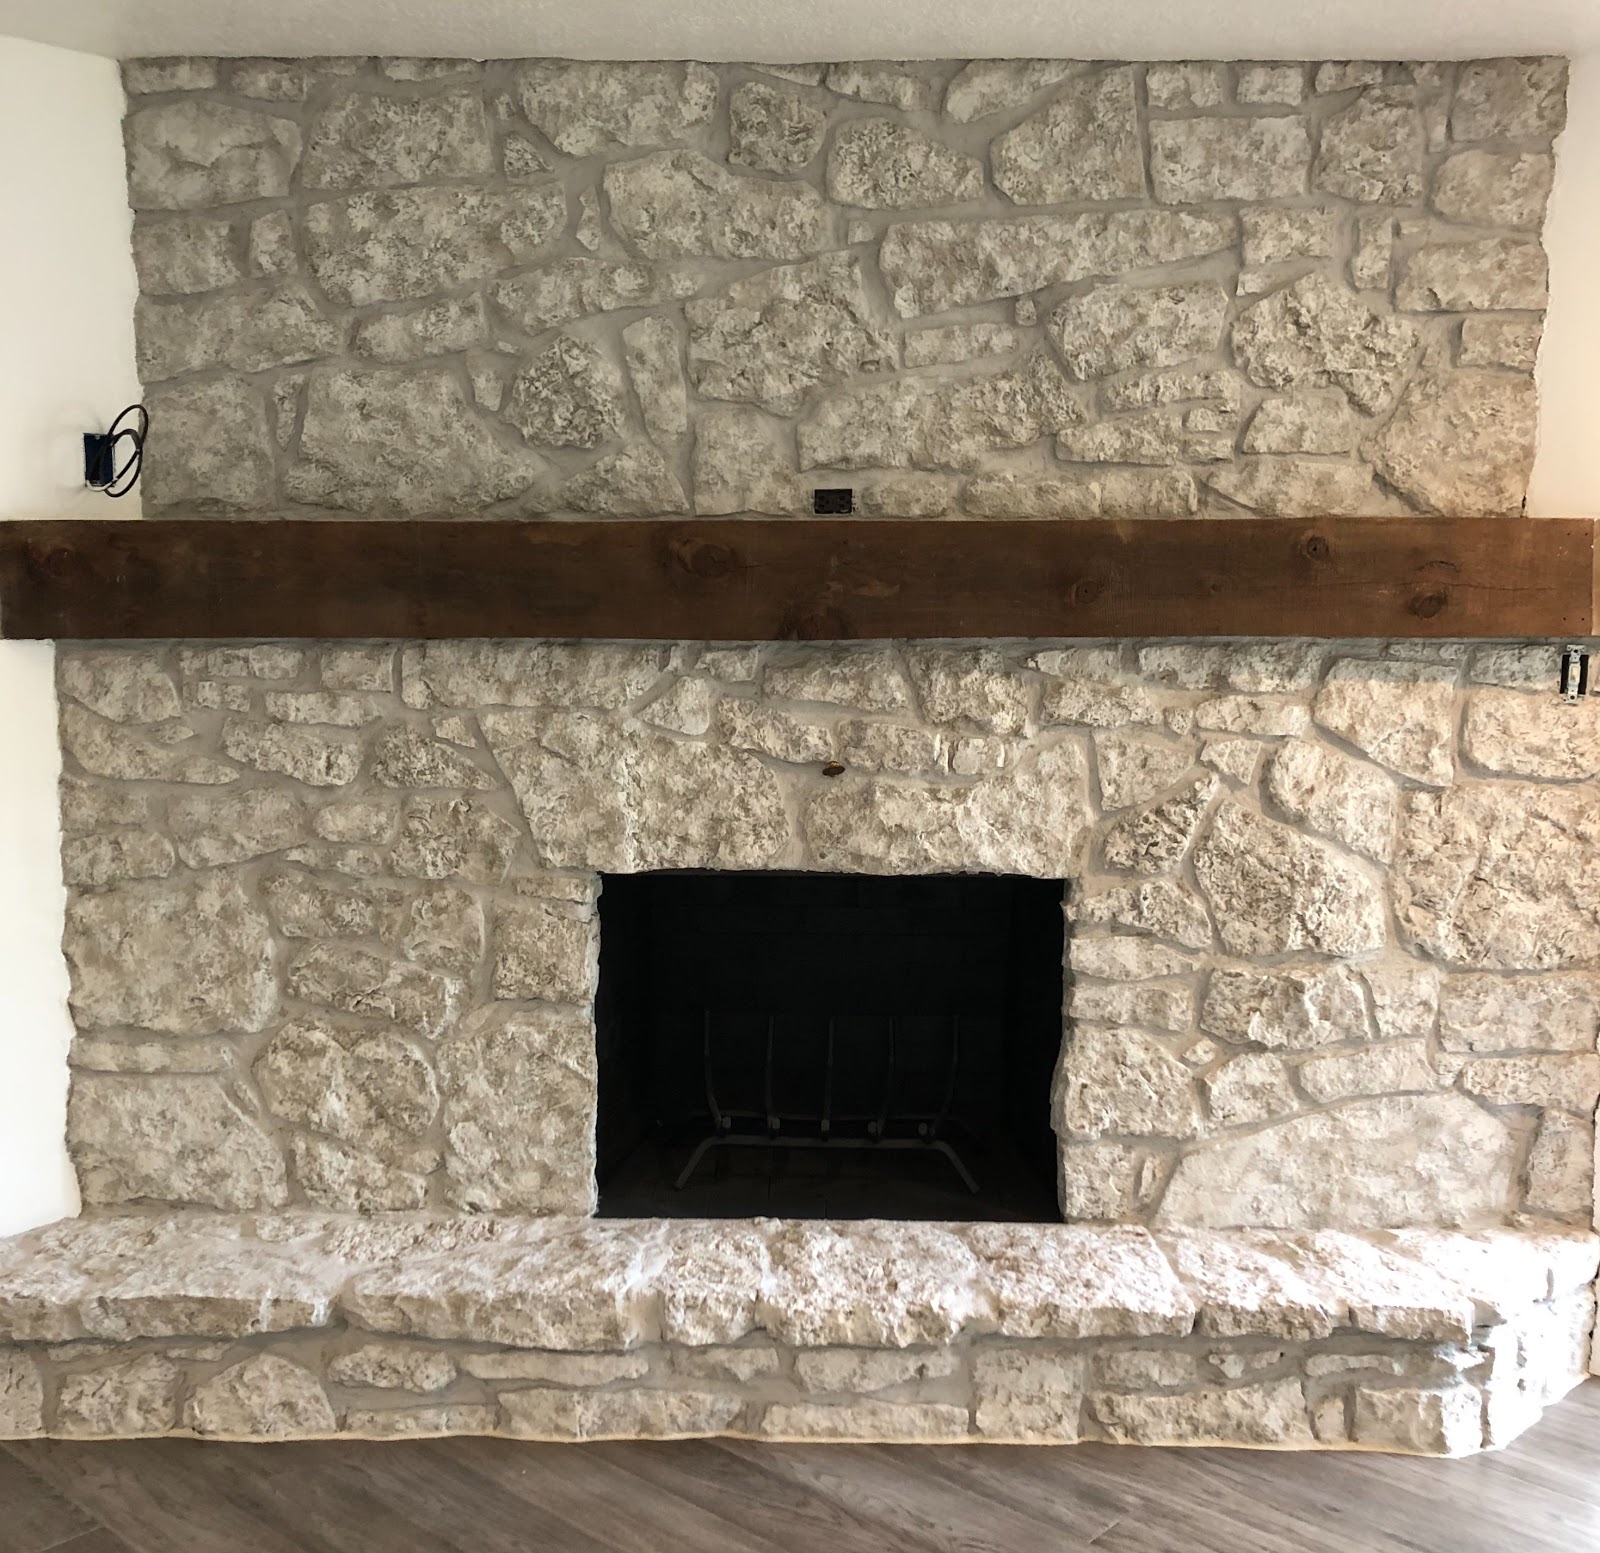 How to Paint A Brick Fireplace to Look Like Stone Awesome Stone Fireplace Painting Guide